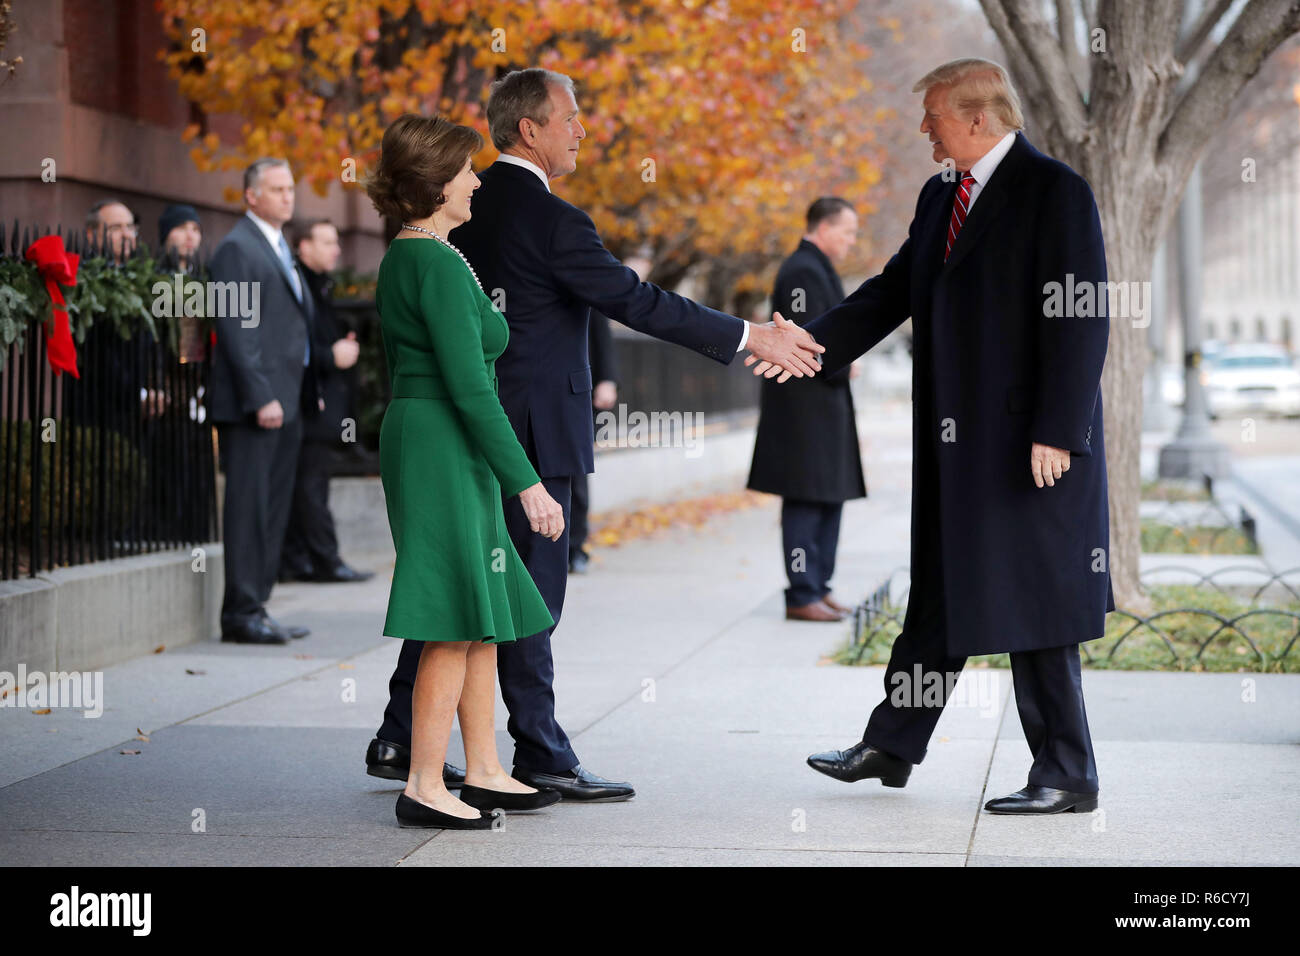 Washington, DC, USA. 04th Dec, 2018. Former first lady Laura Bush and former President George W. Bush greet President Donald Trump outside of Blair House December 04, 2018 in Washington, DC, USA. The Trumps were paying a condolence visit to the Bush family who are in Washington for former President George H.W. Bushs state funeral and related honors. Credit: Chip Somodevilla/Pool via CNP | usage worldwide Credit: dpa/Alamy Live News Stock Photo